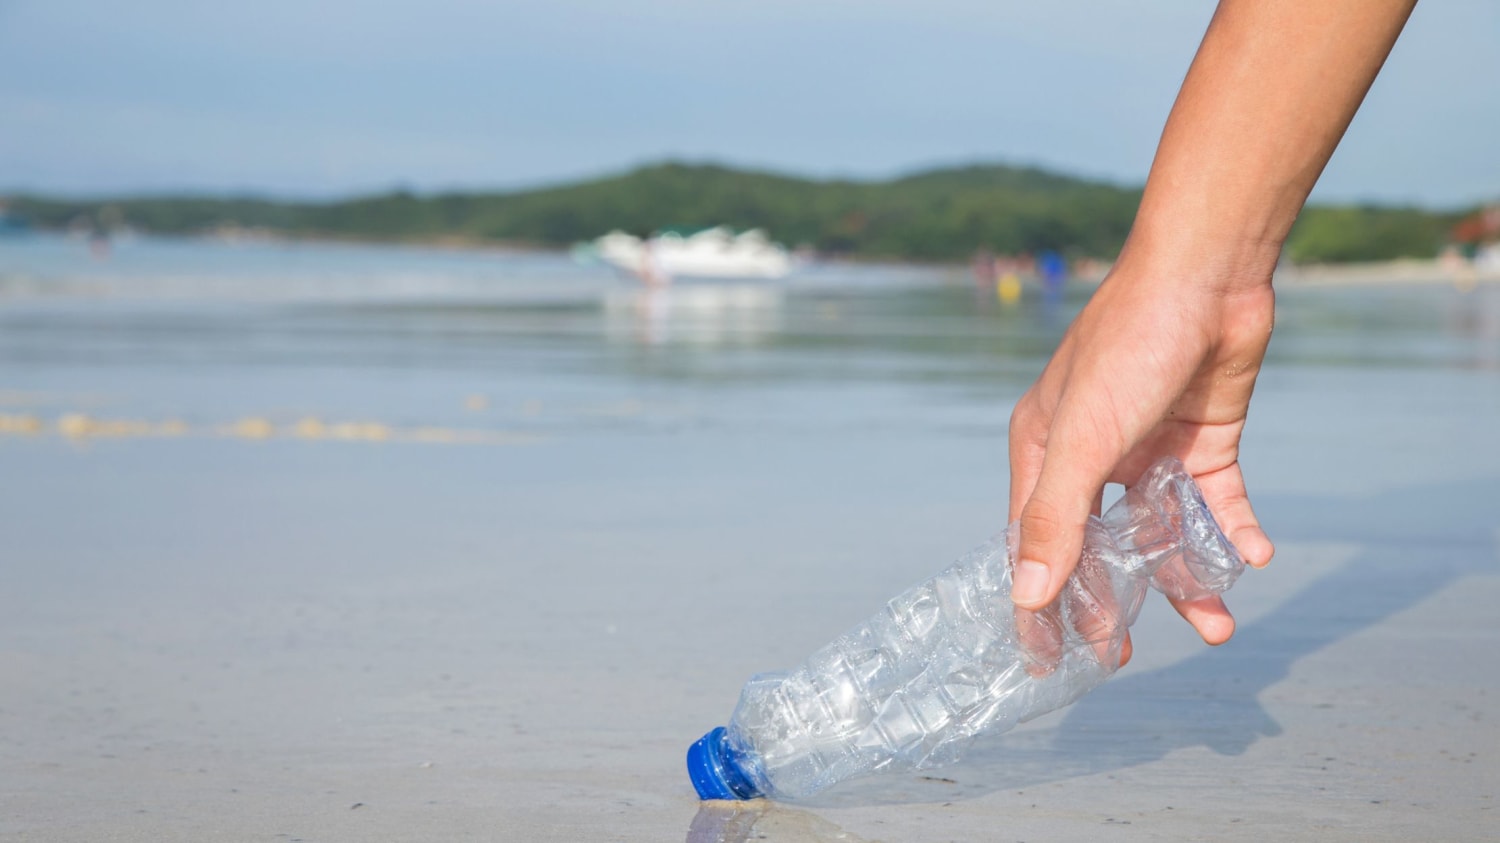 15 Things You Can Do to Help Keep Oceans Clean